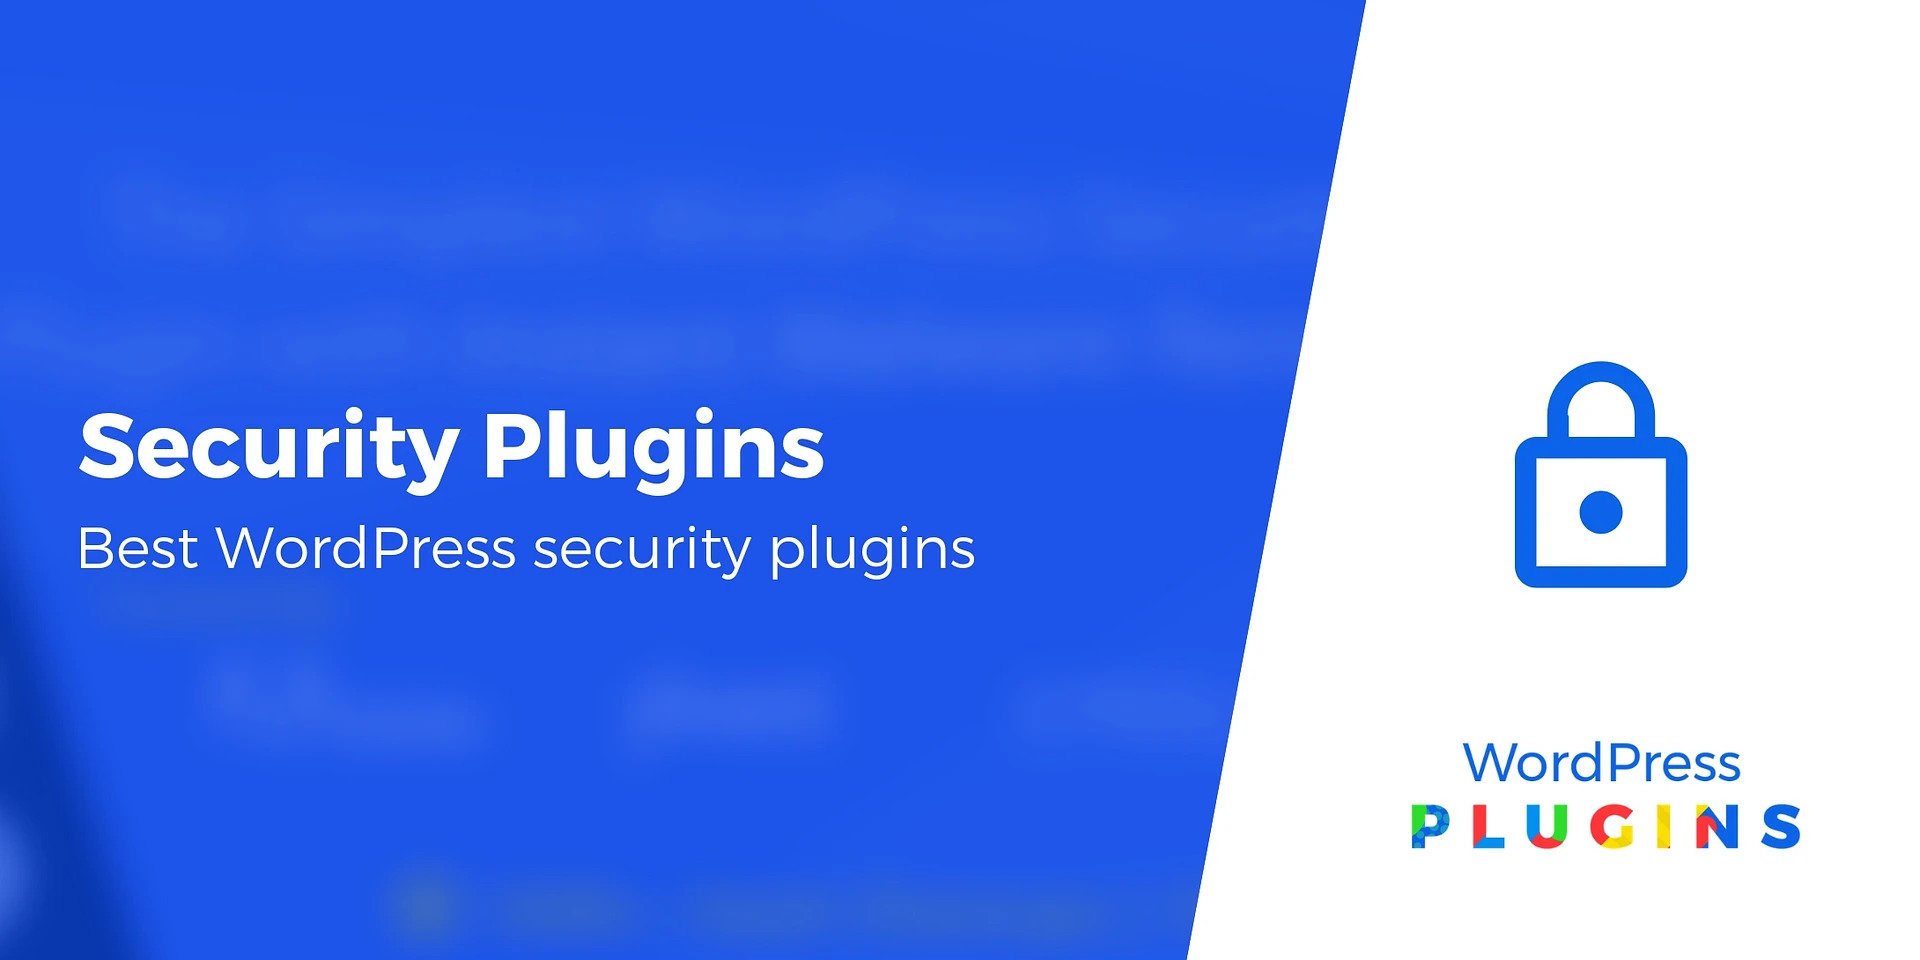 19 WordPress Security Plugins To Protect For Your Website